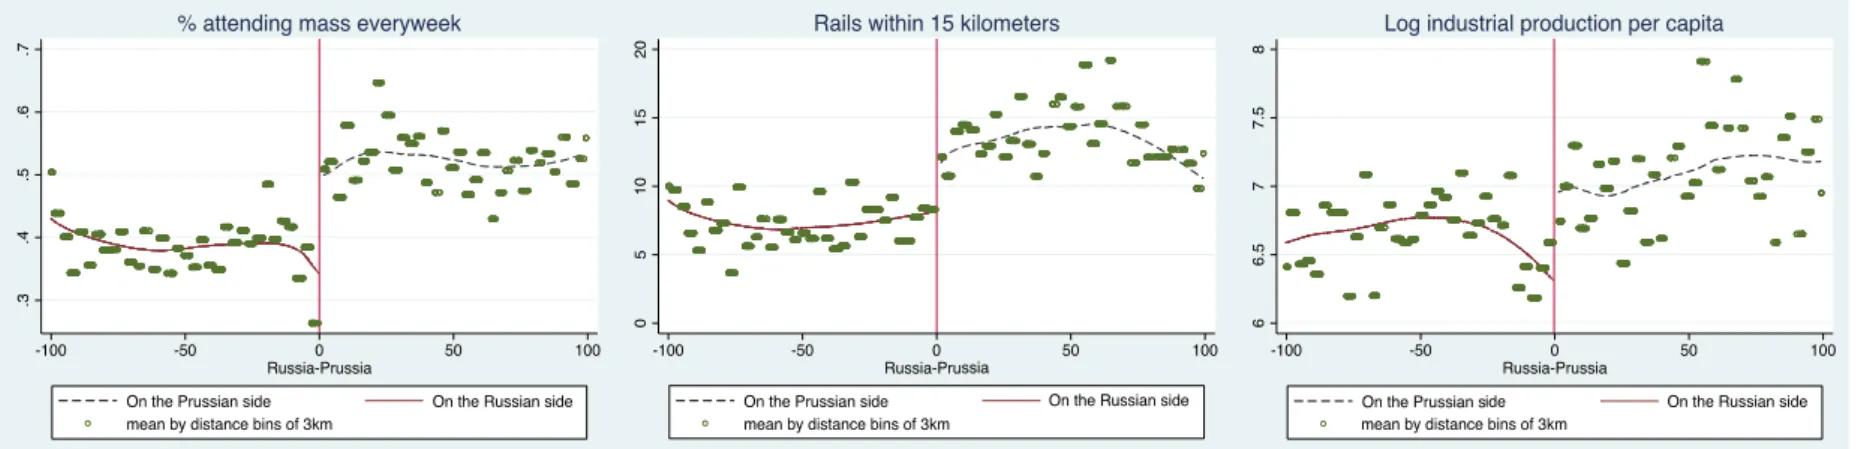 Figure 6. Cultural and economic roots of empire influence at empire borders (by distance bins)  Russia-Prussia border: 